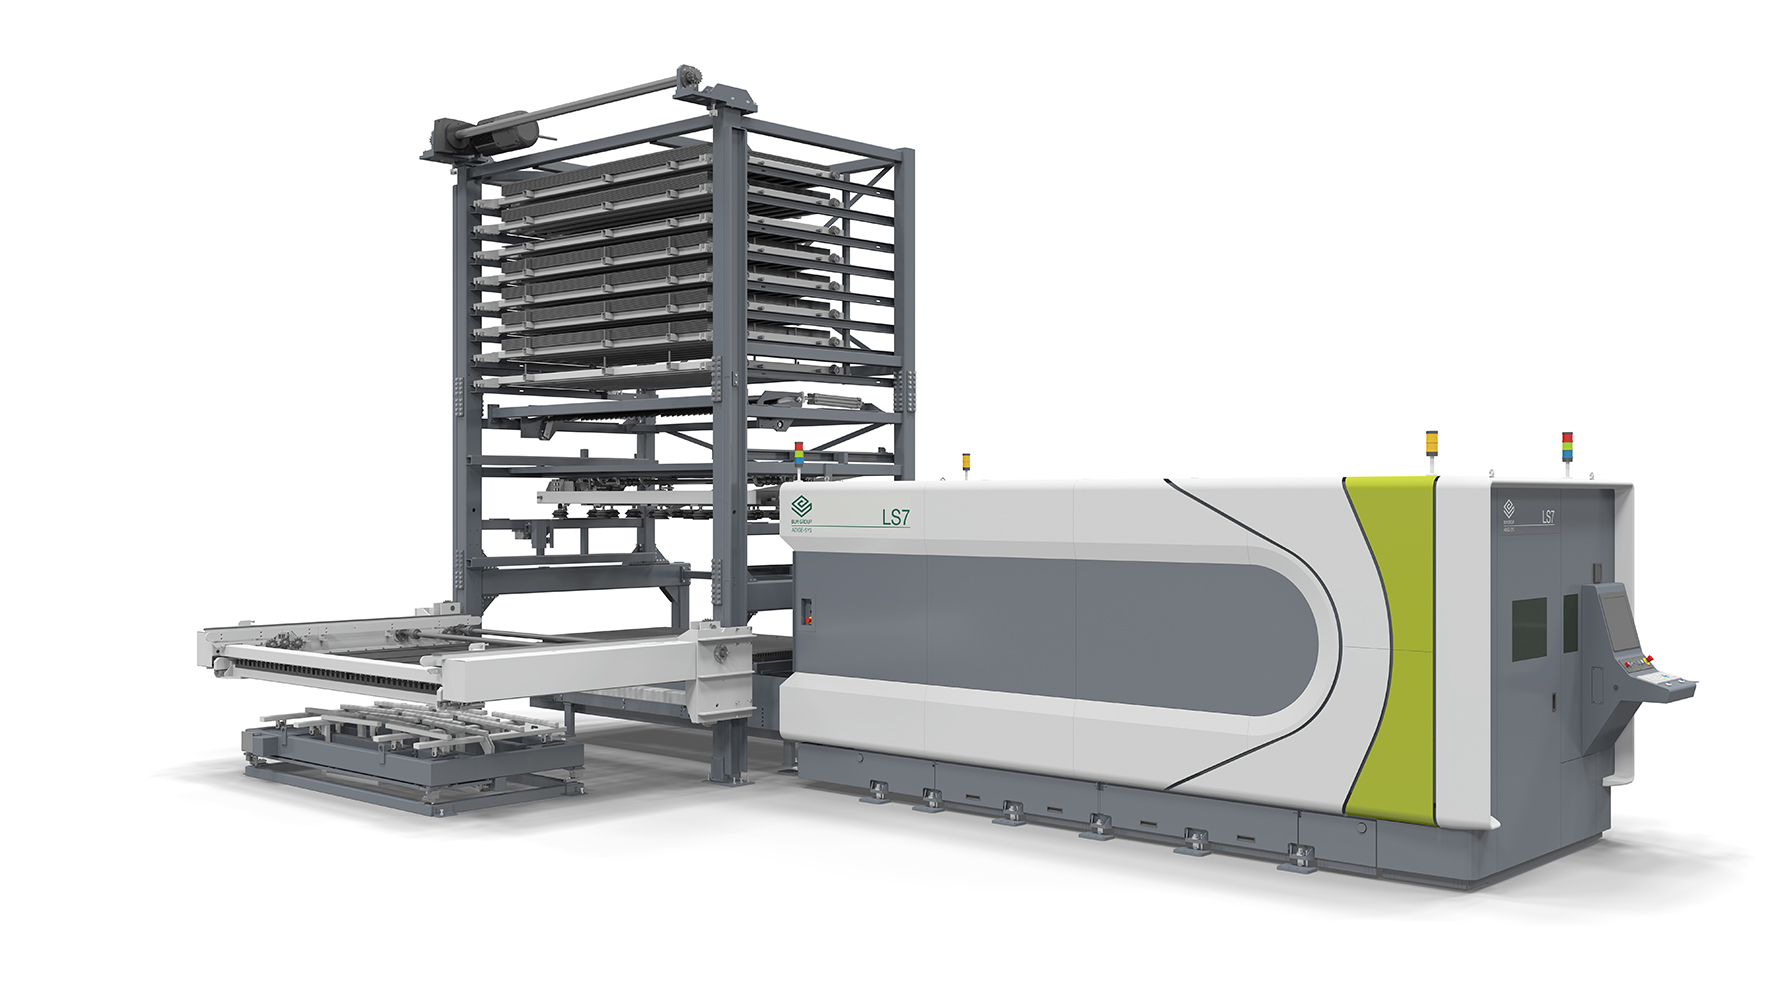 The automatic pallet changing system for the LS series is one of the fastest on the market, according to BLM. © BLM Group